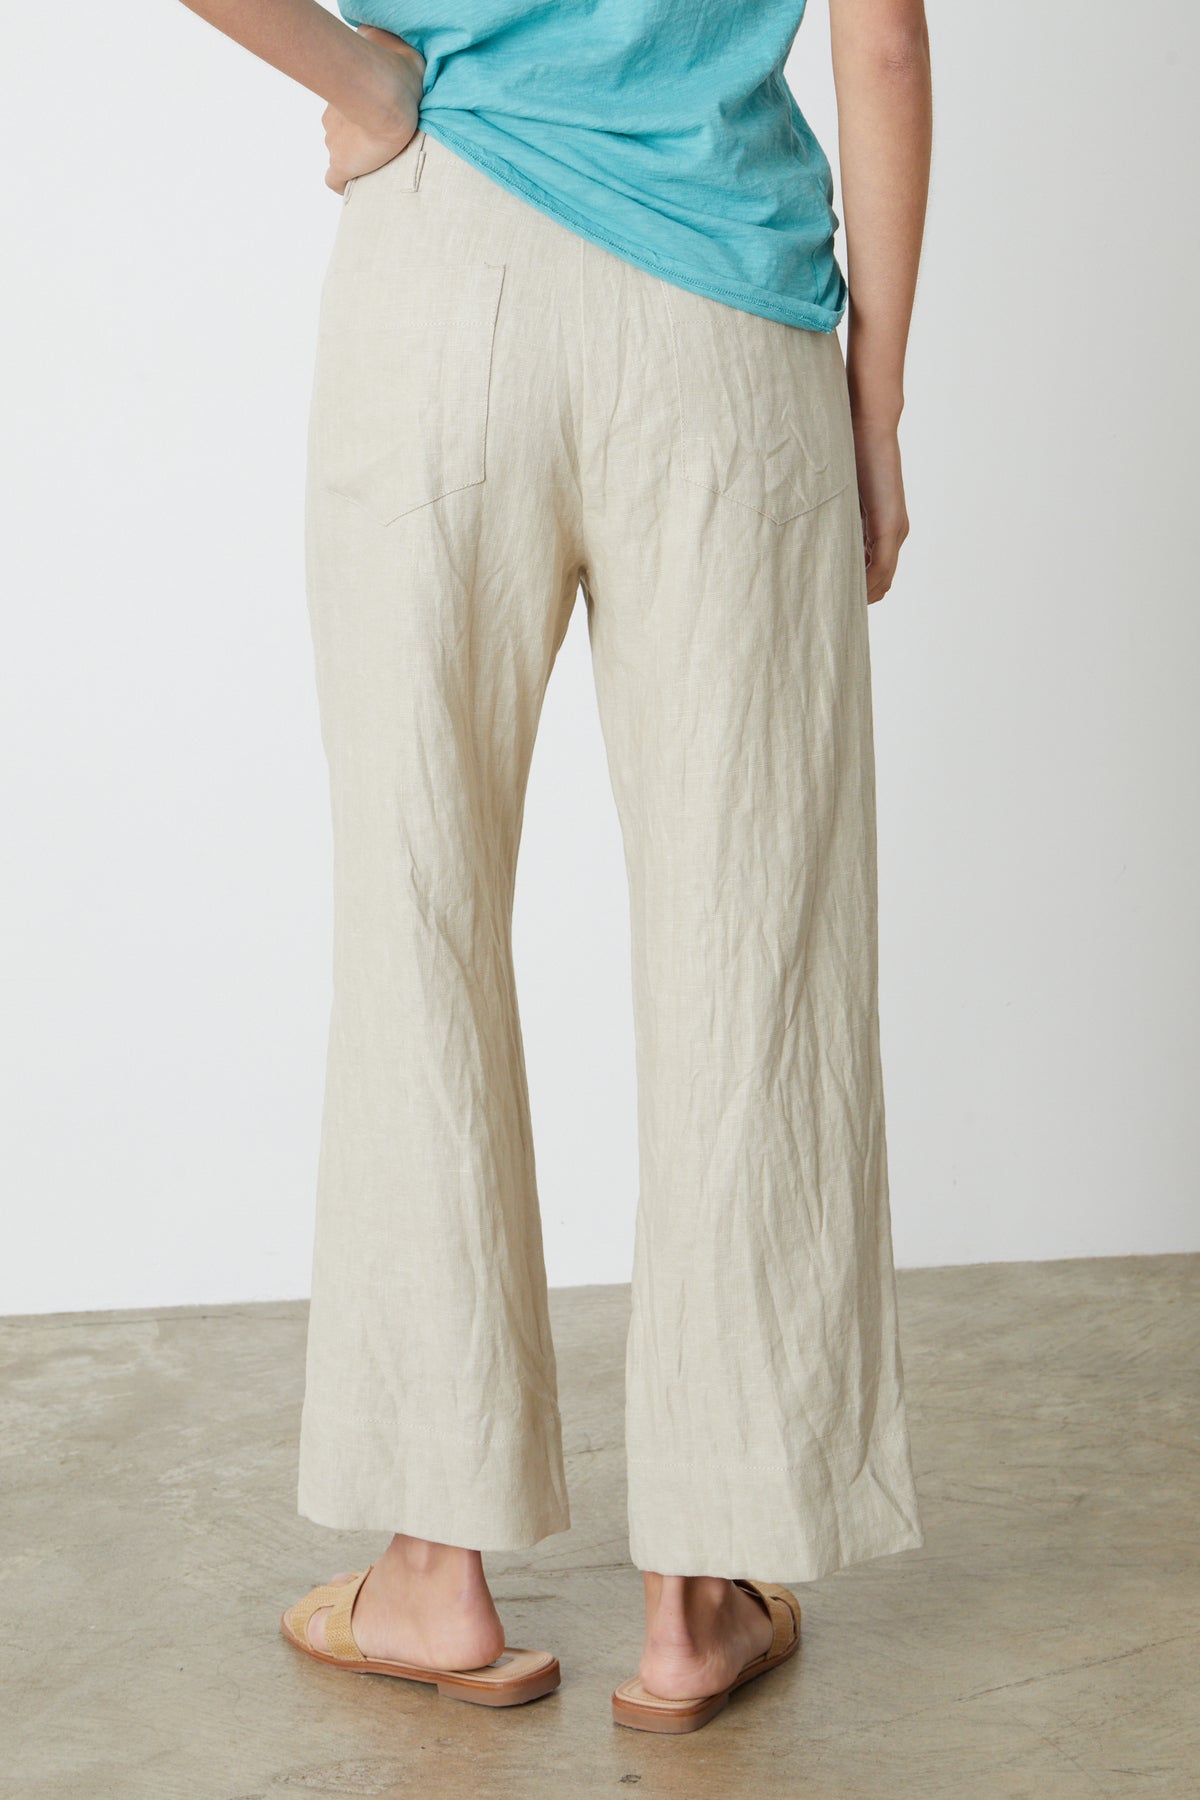 The back view of a woman wearing Velvet by Graham & Spencer's DRU HEAVY LINEN PANT.-26544378839233